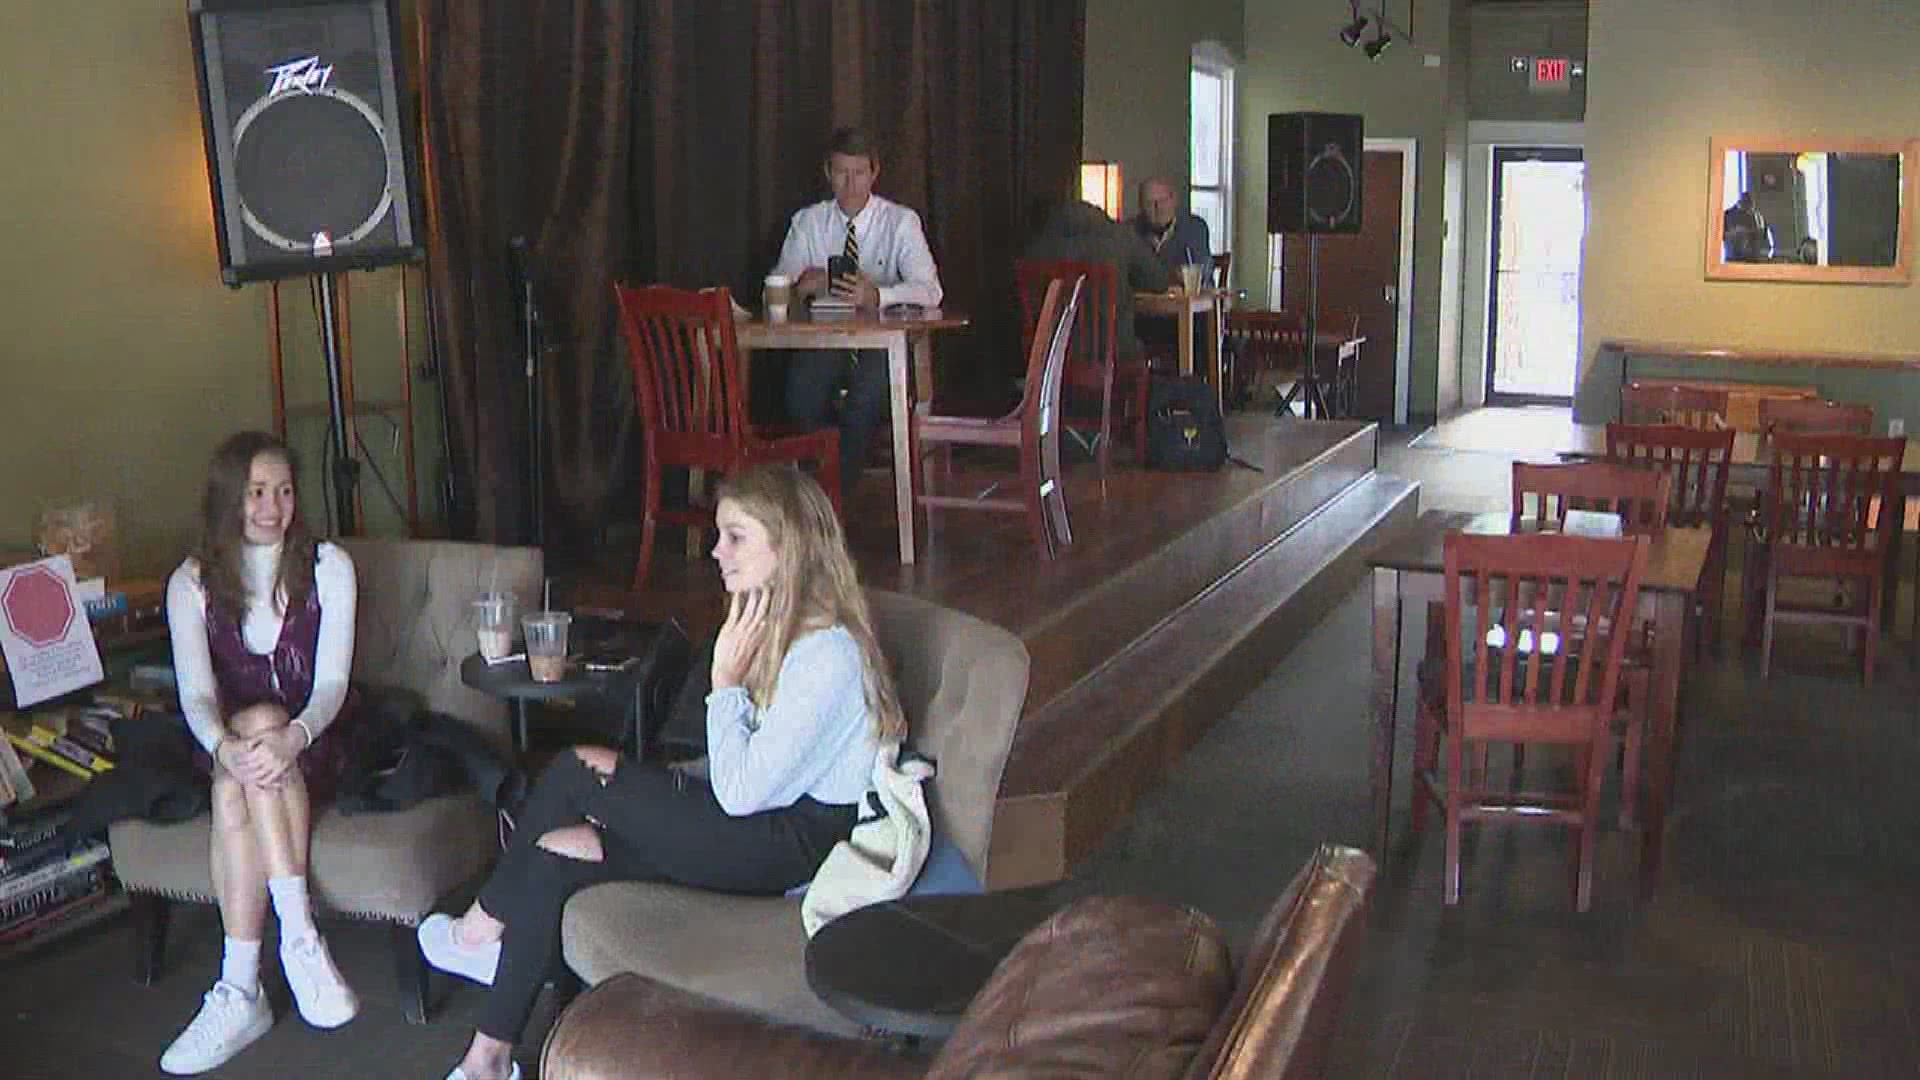 The owner of Cool Beanz Coffee House says she wanted to keep her dining room closed to customers until her staff had the opportunity to get vaccinated.